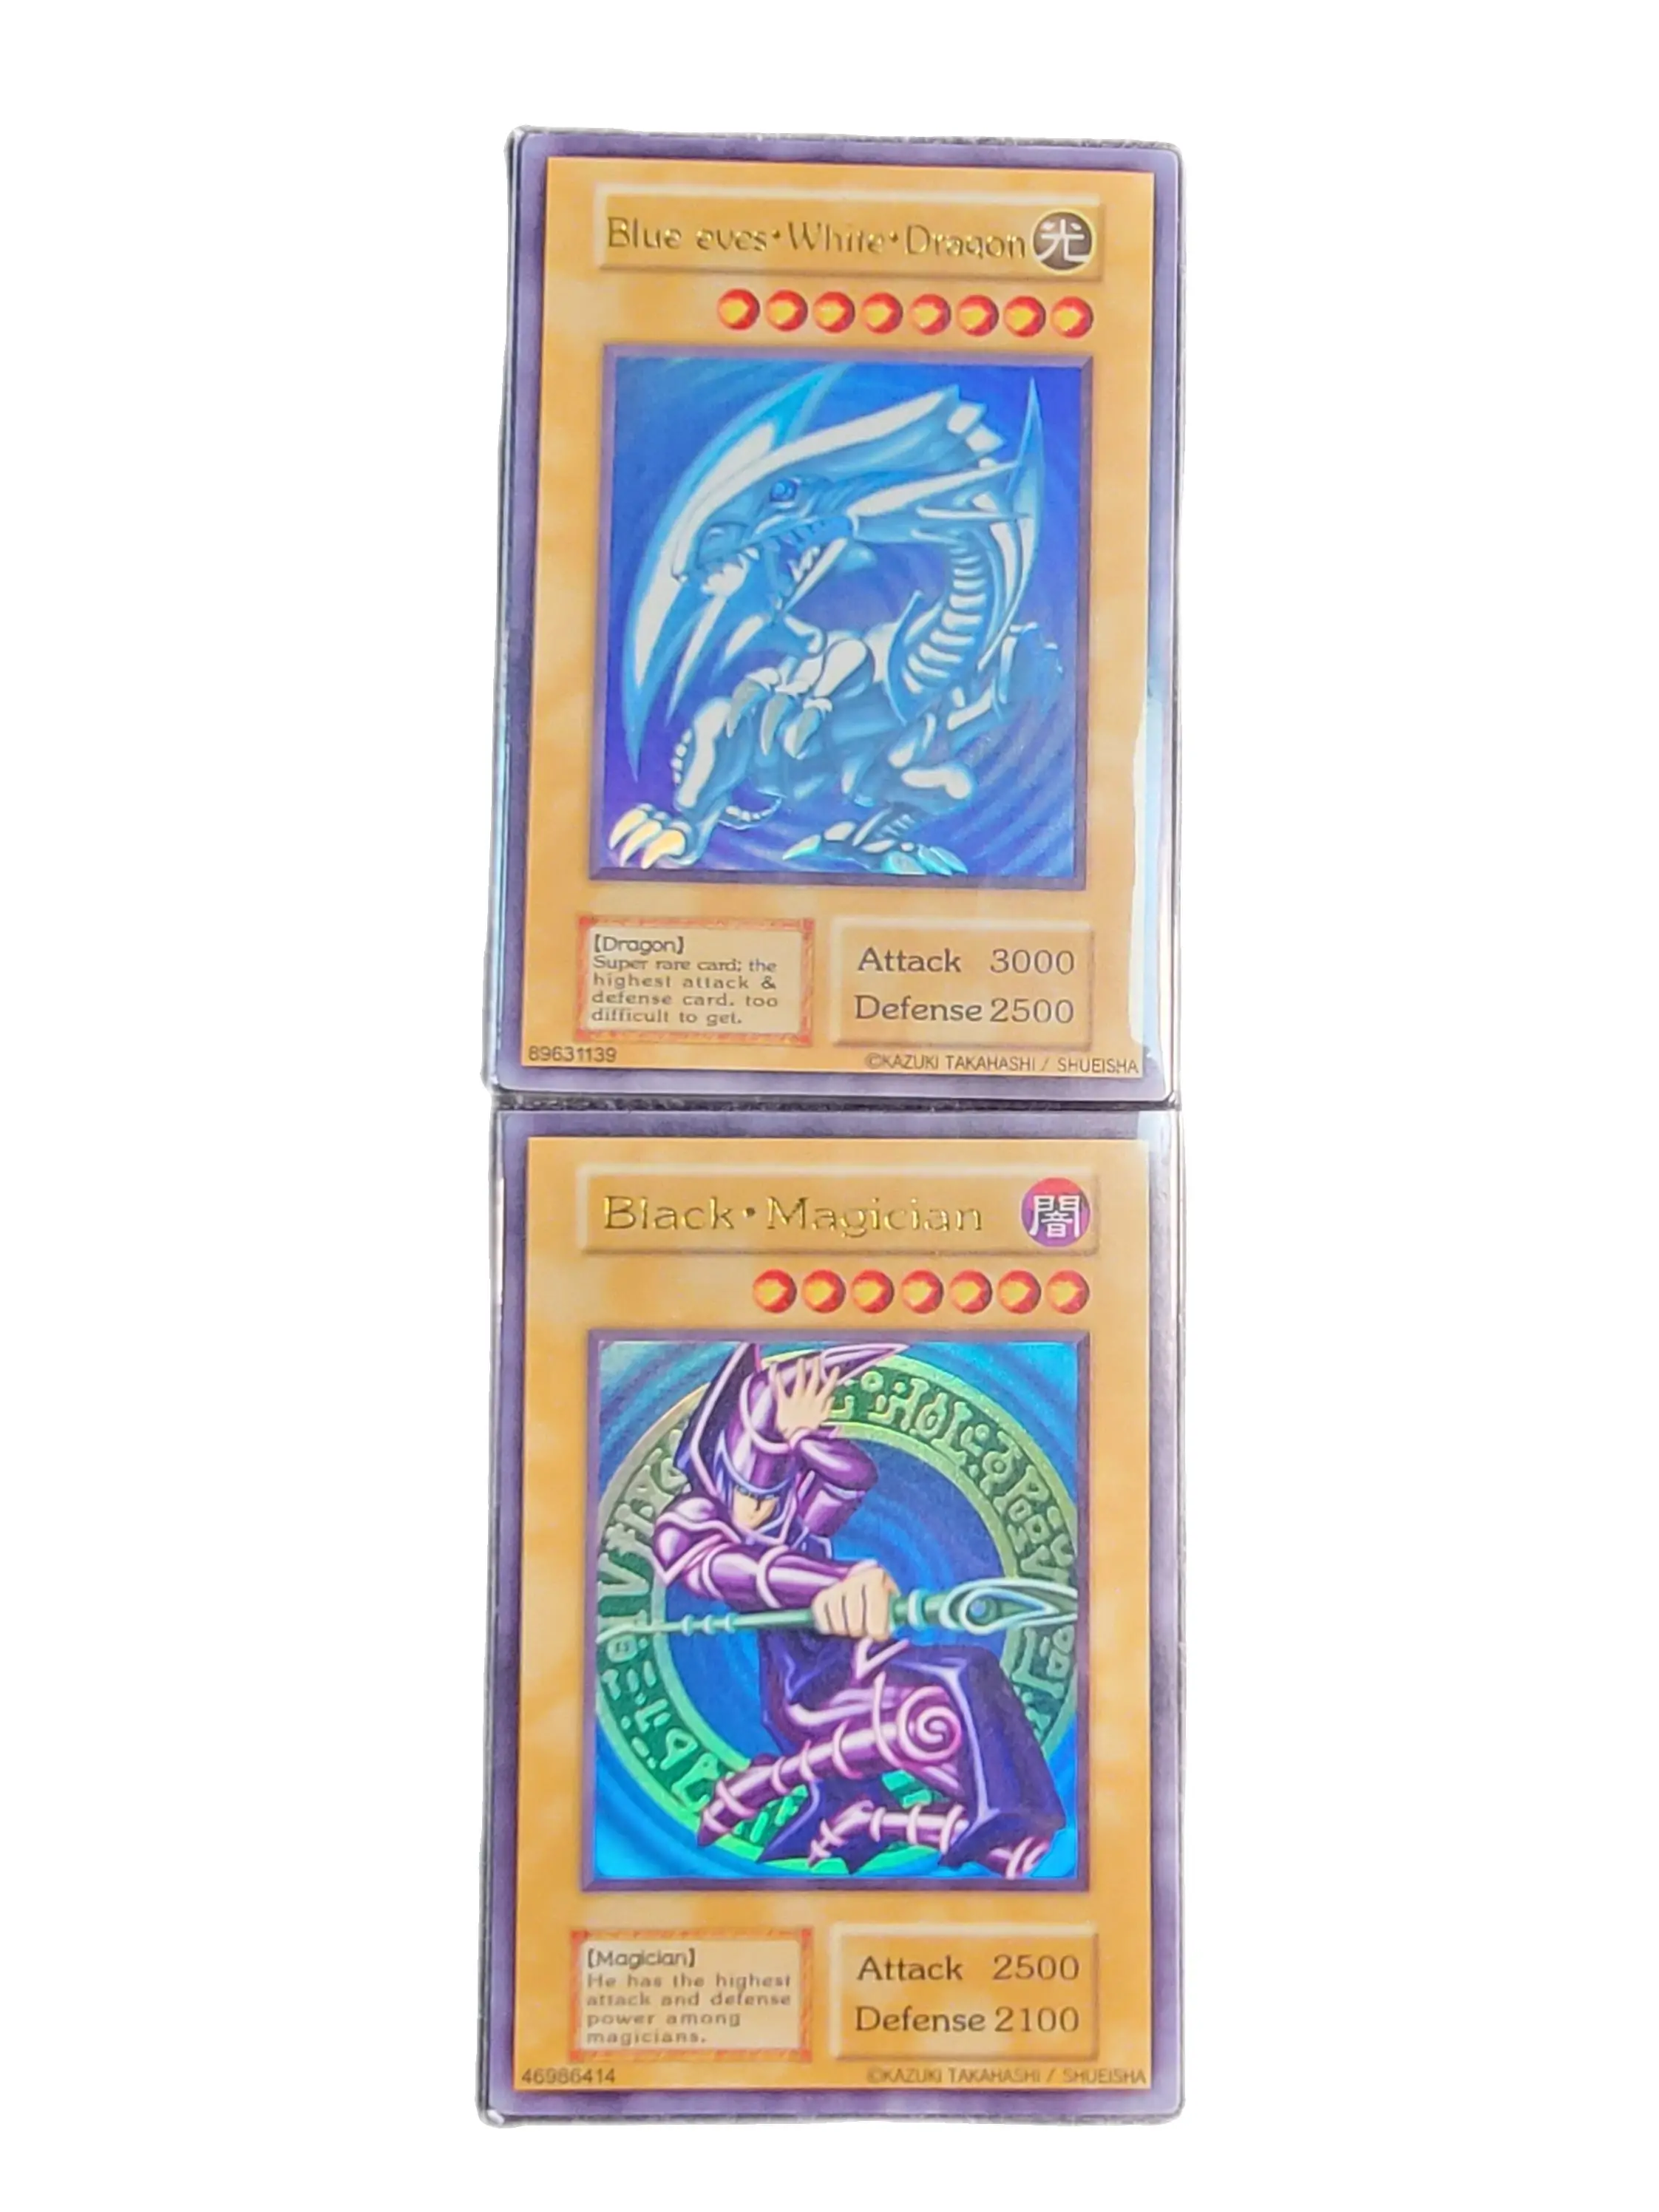 

Yu Gi Oh TCG Ultra Rare Weekly Youth JUMP/Dark Magician/Blue-Eyes White Dragon Gift Collection Card Toy (not original)